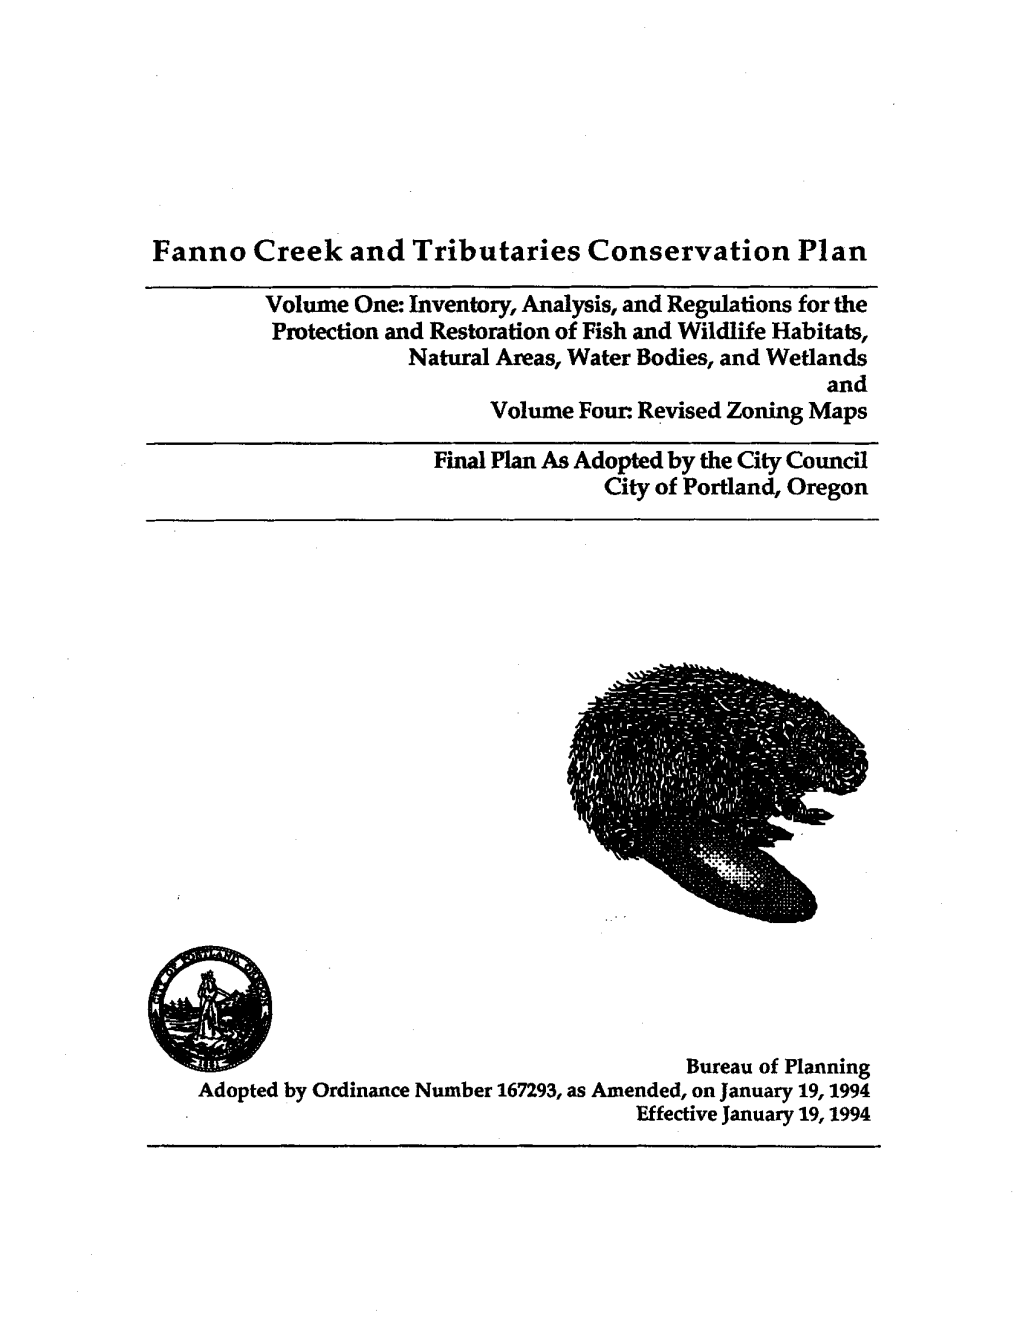 Fanno Creek and Tributaries Conservation Plan